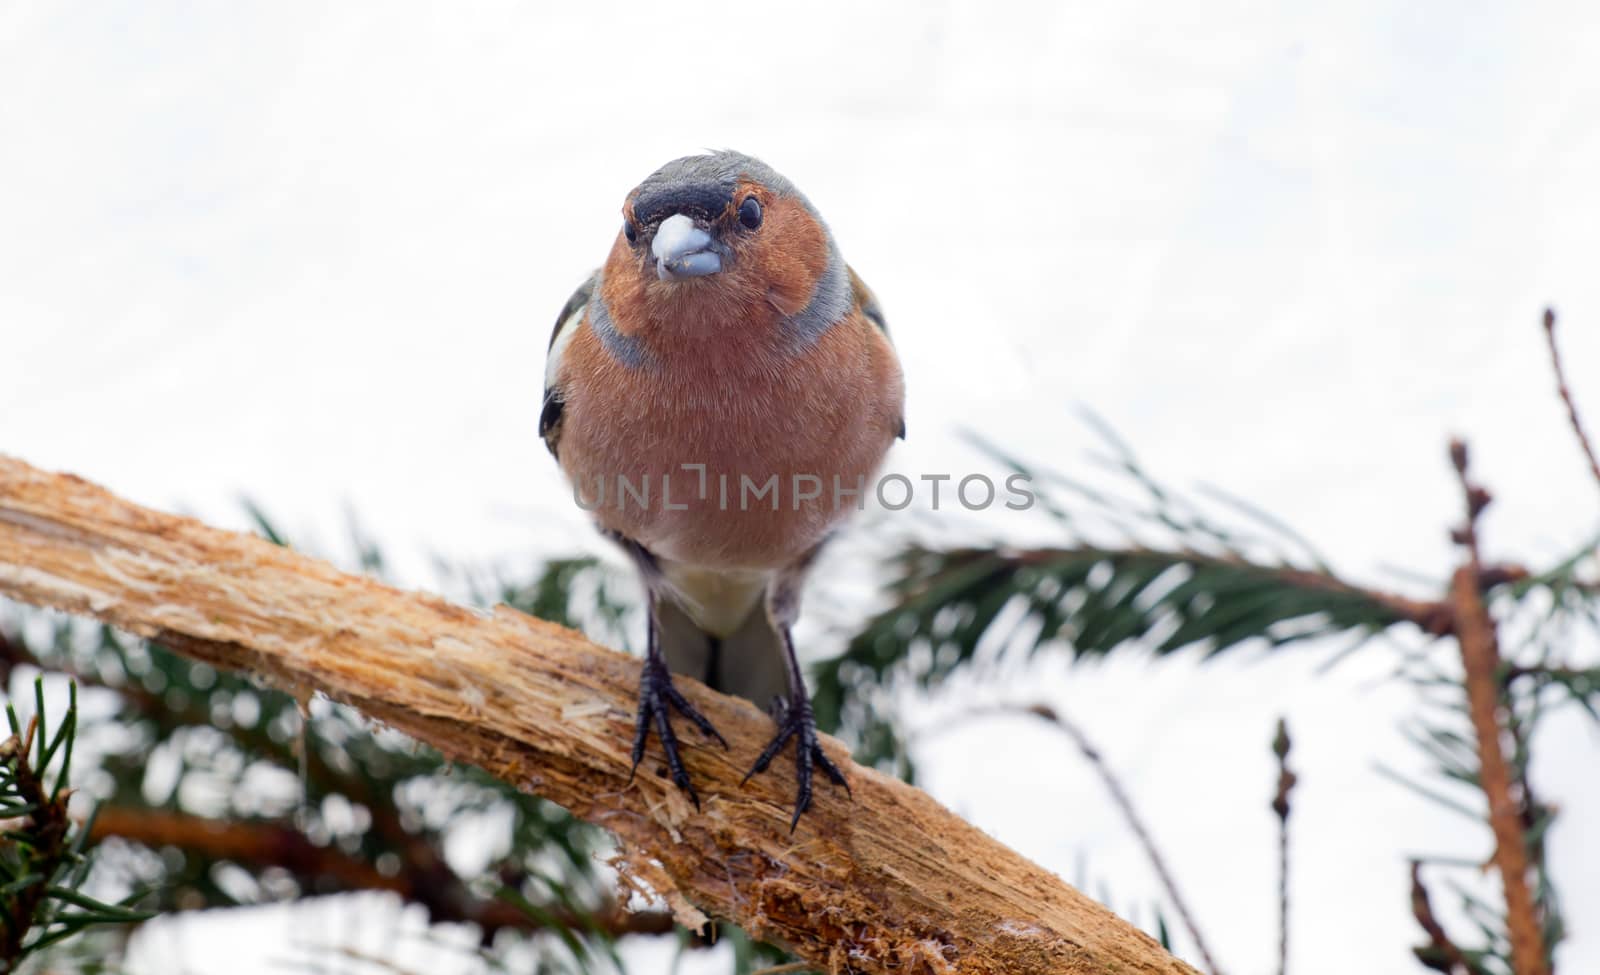 chaffinch by max51288